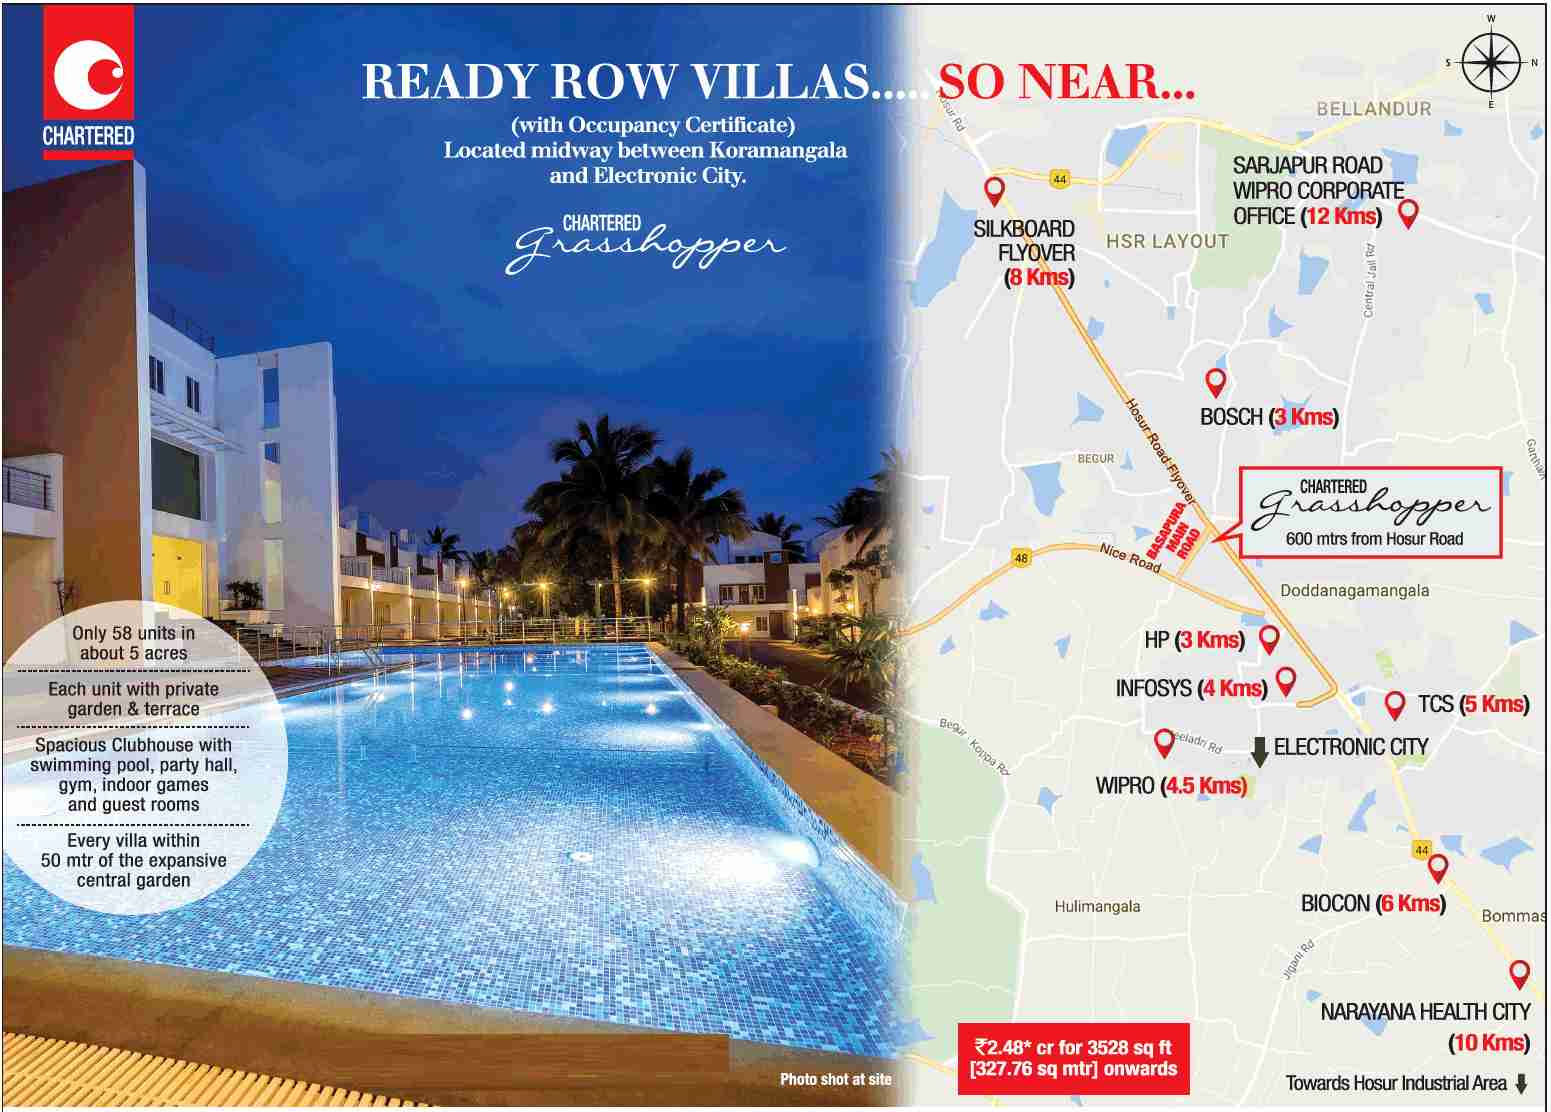 Reside at ready row villas at Chartered Grasshopper in Bangalore Update